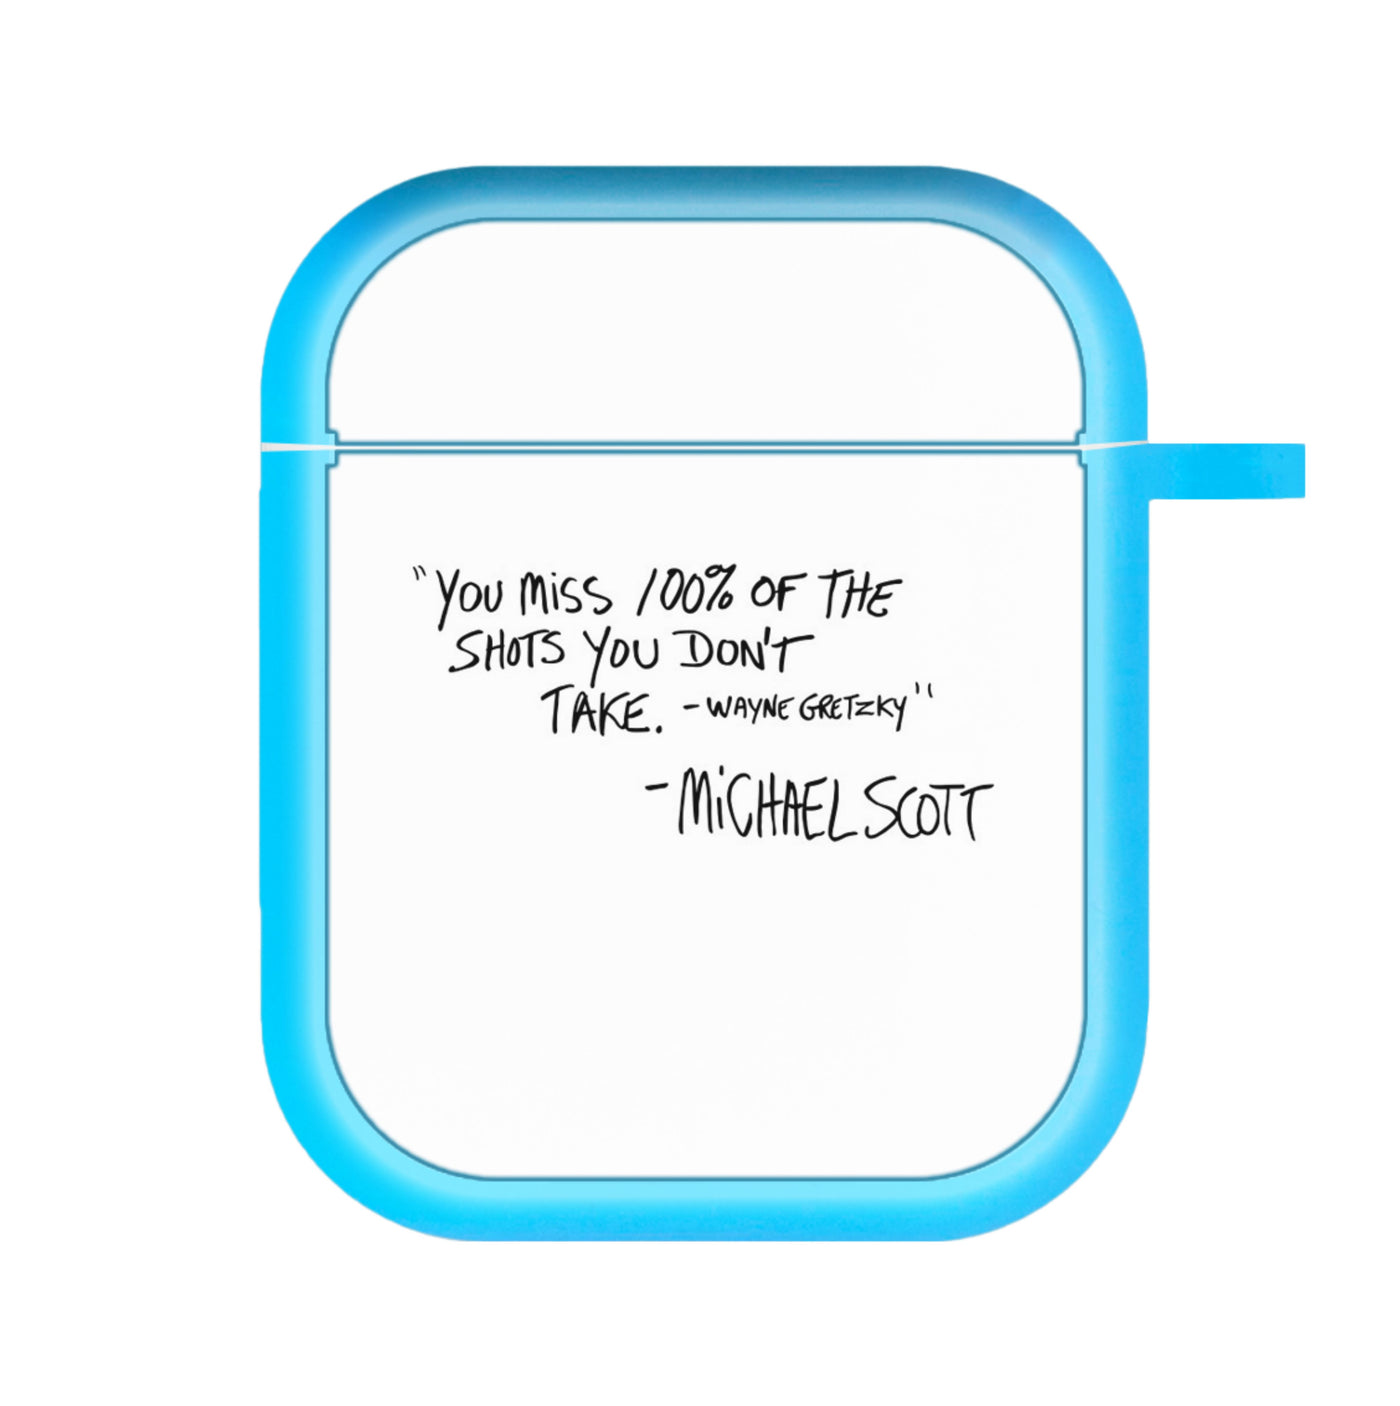 Michael Scott Quote - The Office AirPods Case